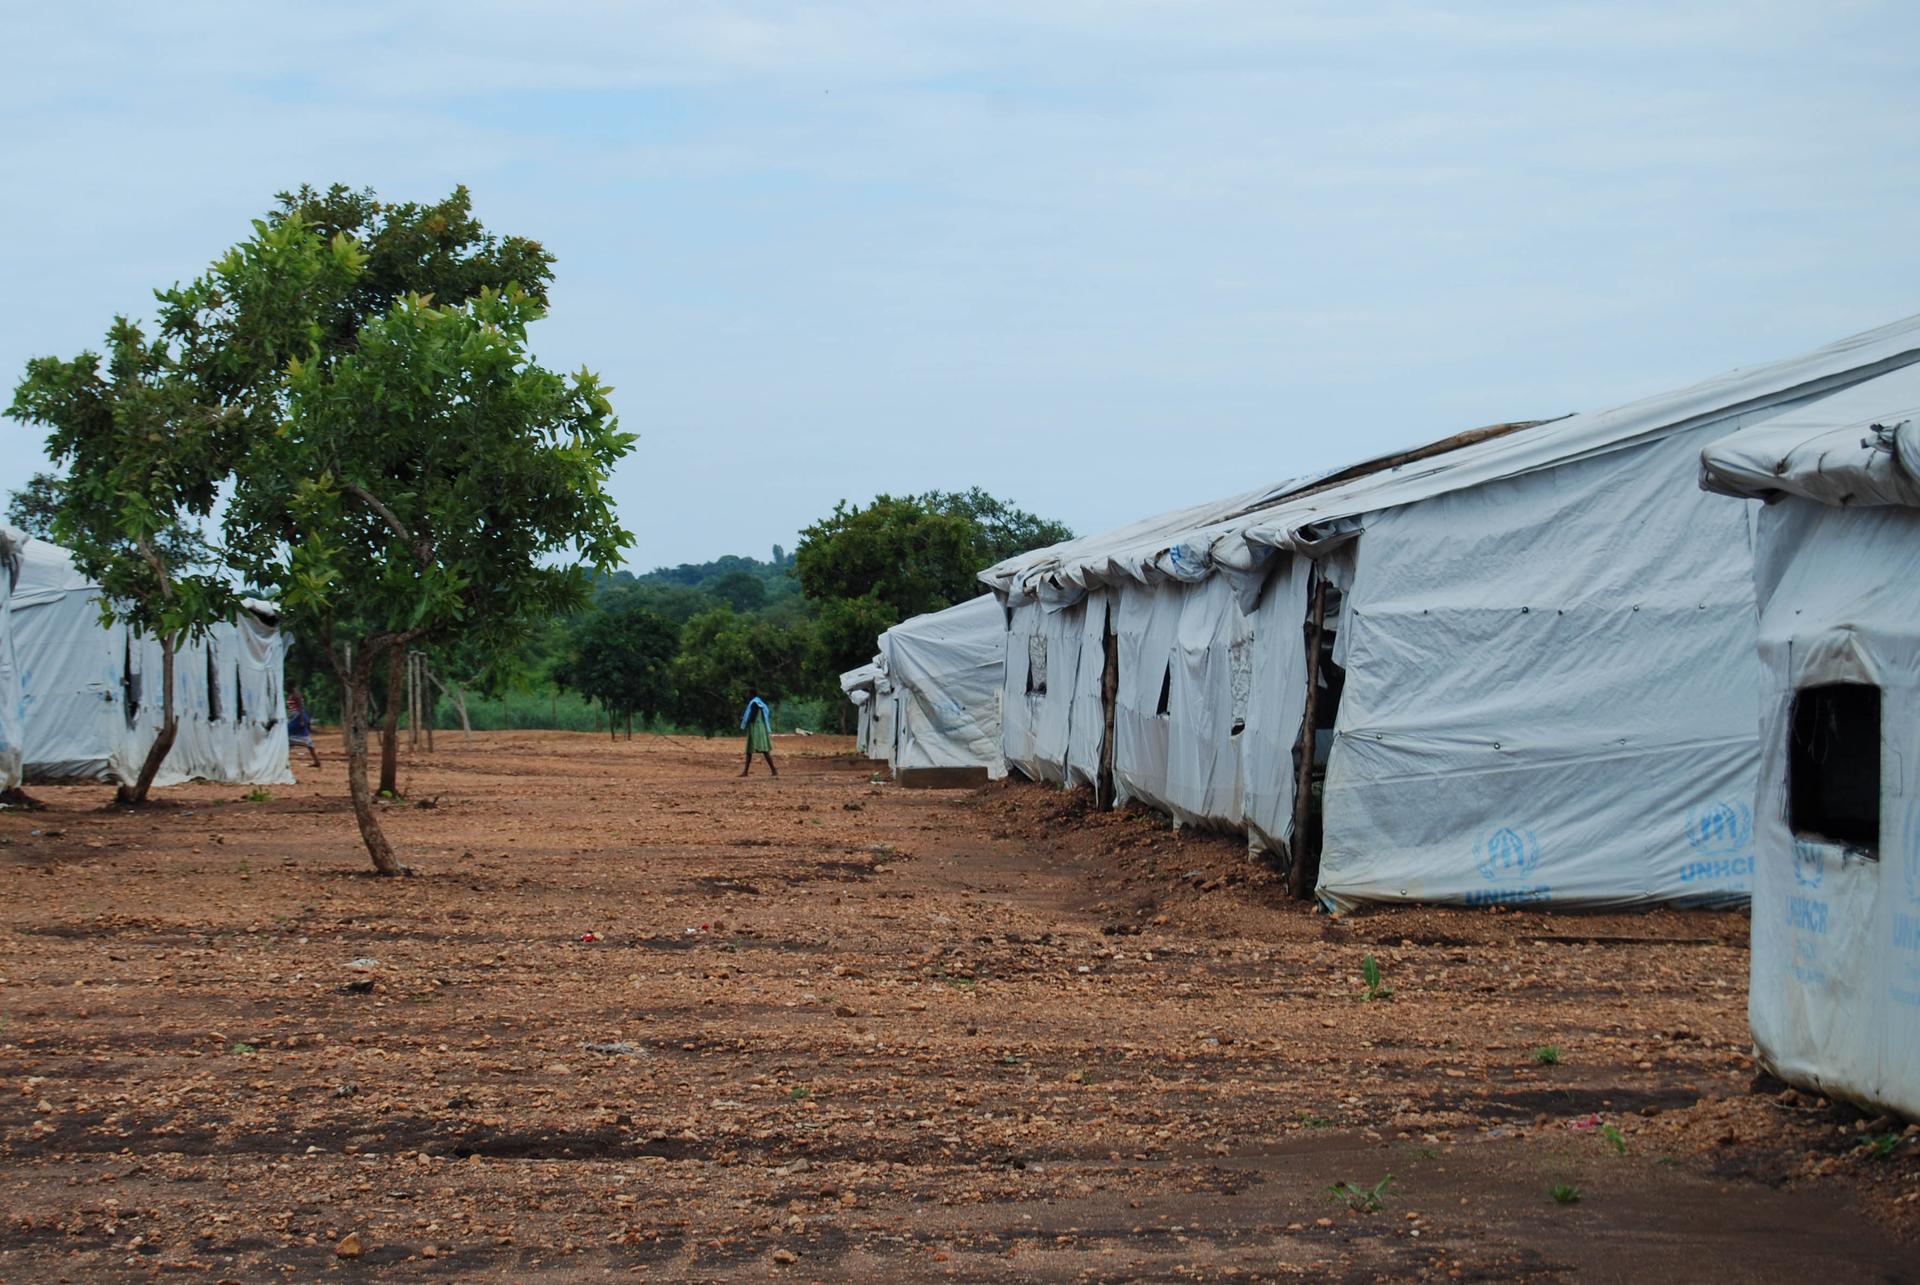 A refugee walks through the central reception area of the Bidi Bidi settlement. New arrivals are sent to other camps in Uganda, so this area is now largely deserted.